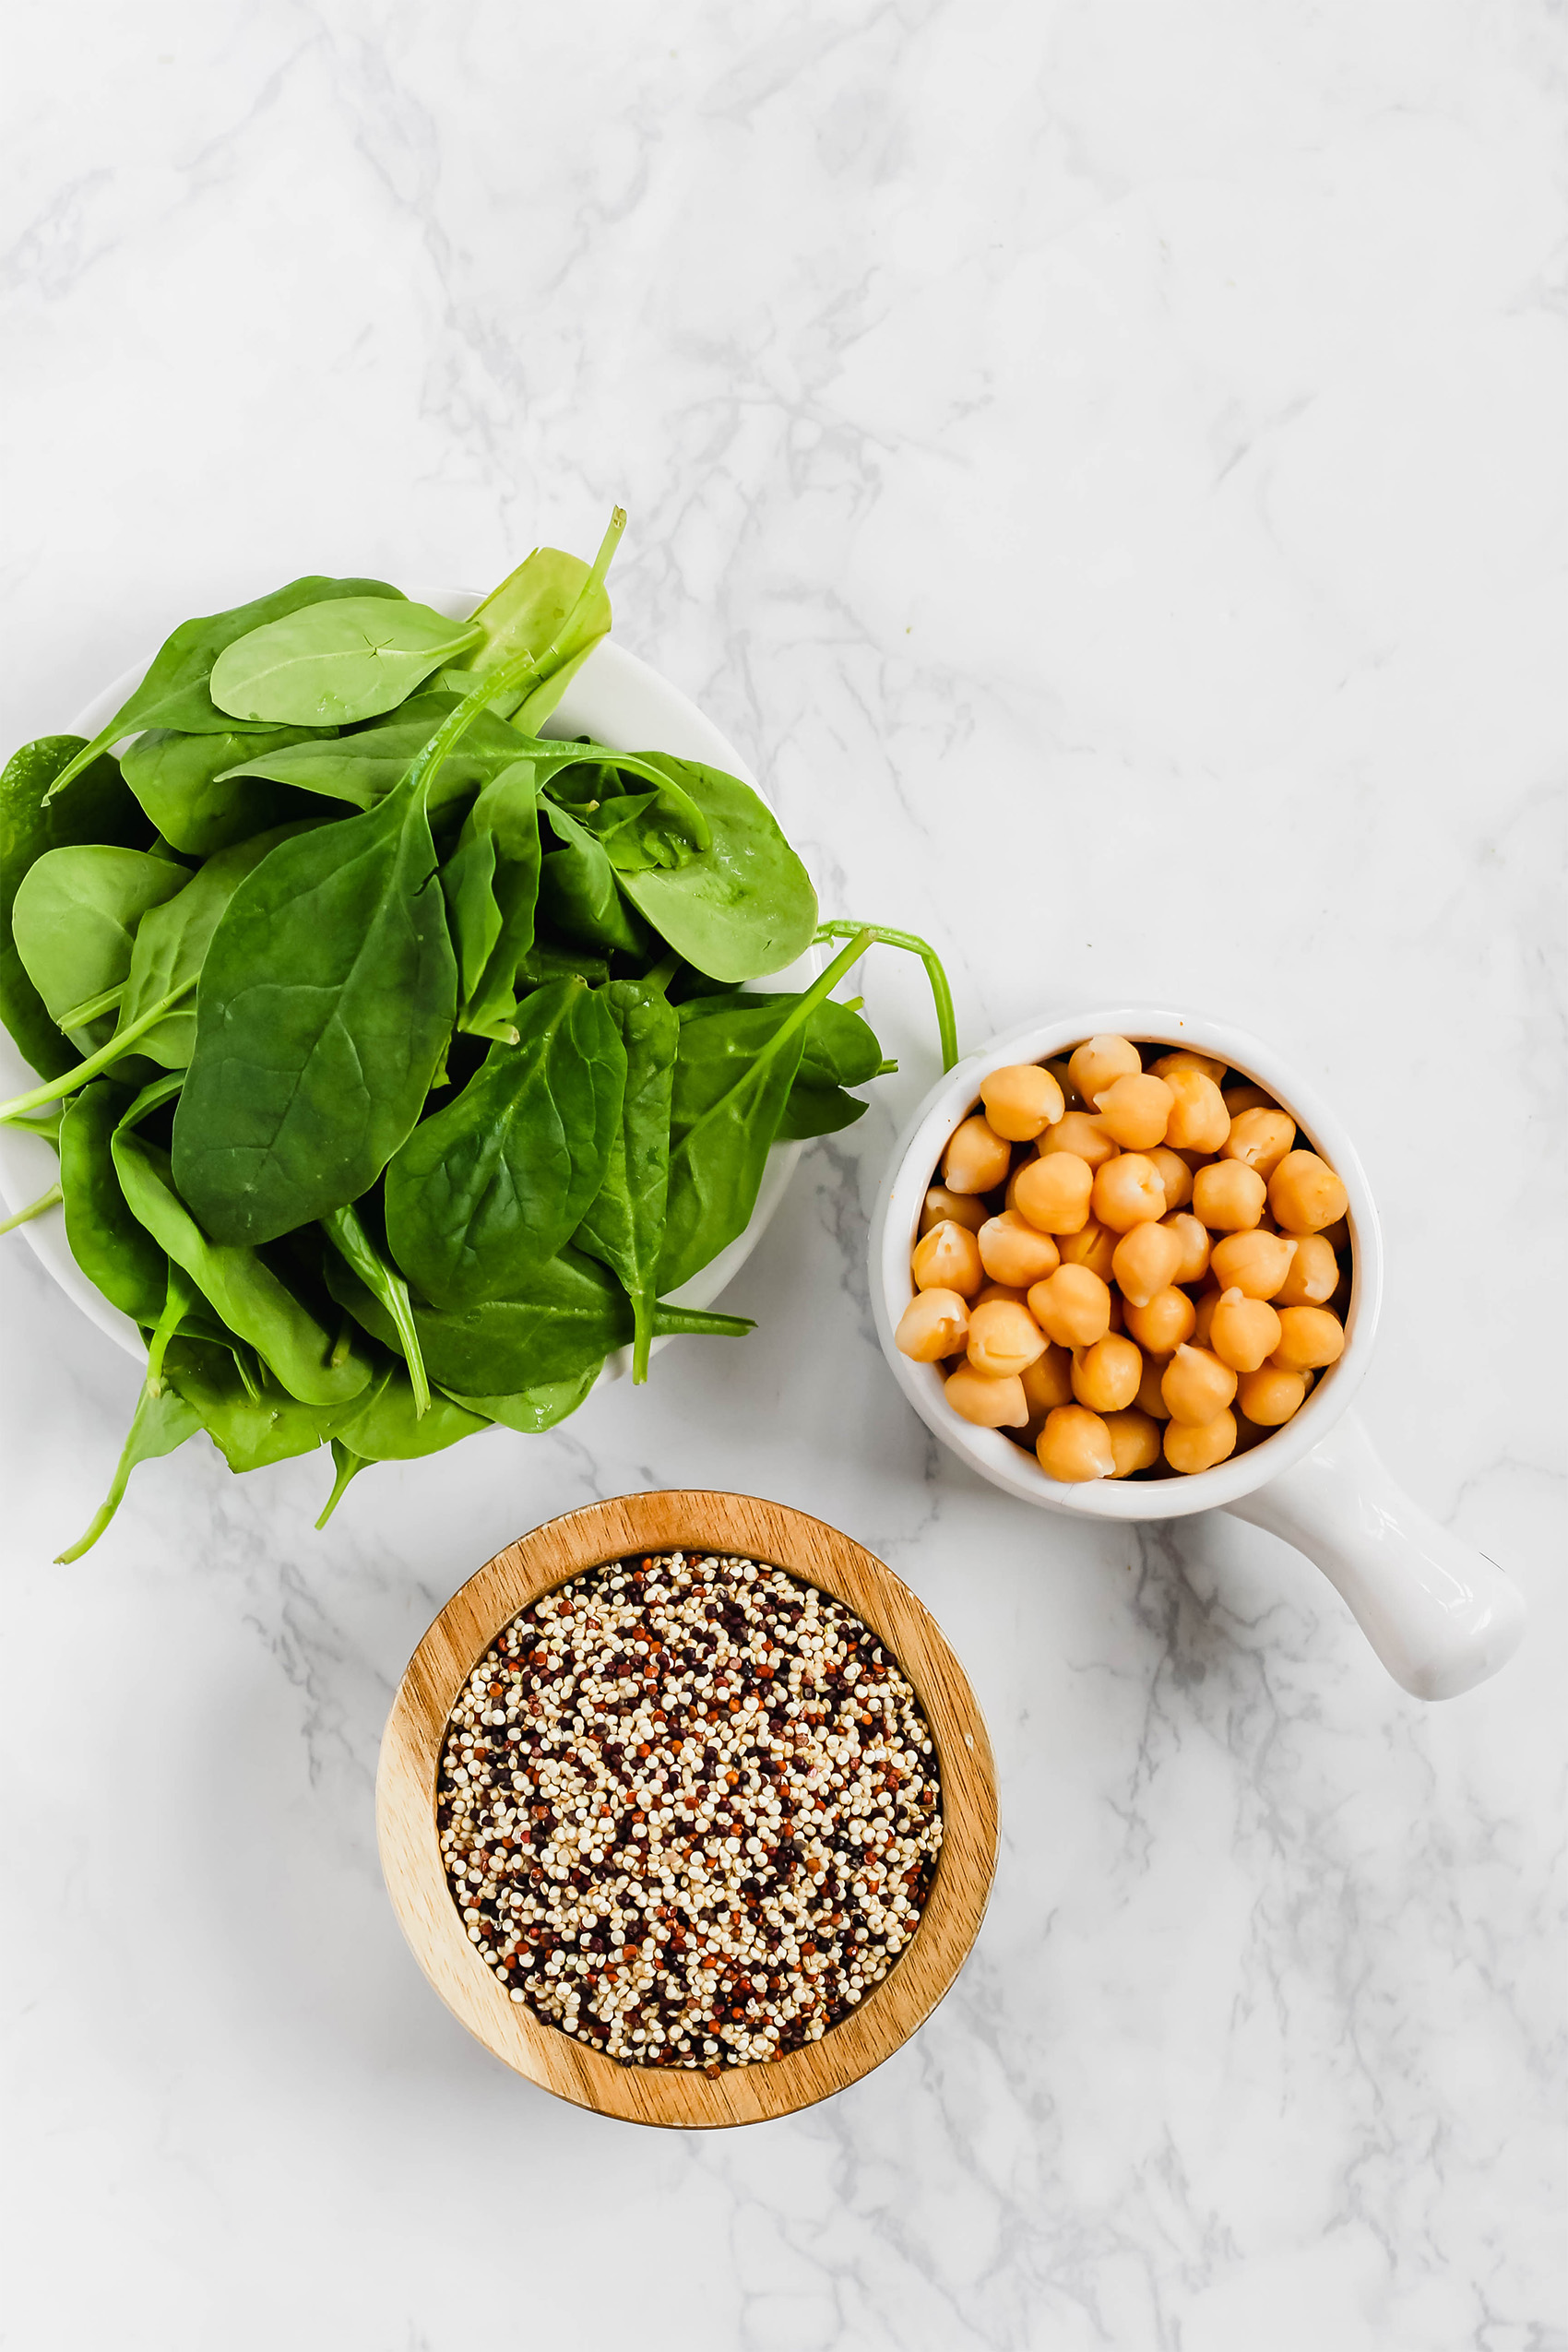 a cup of chickpeas, a bowl of dried quinoa and a bowl of baby spinach